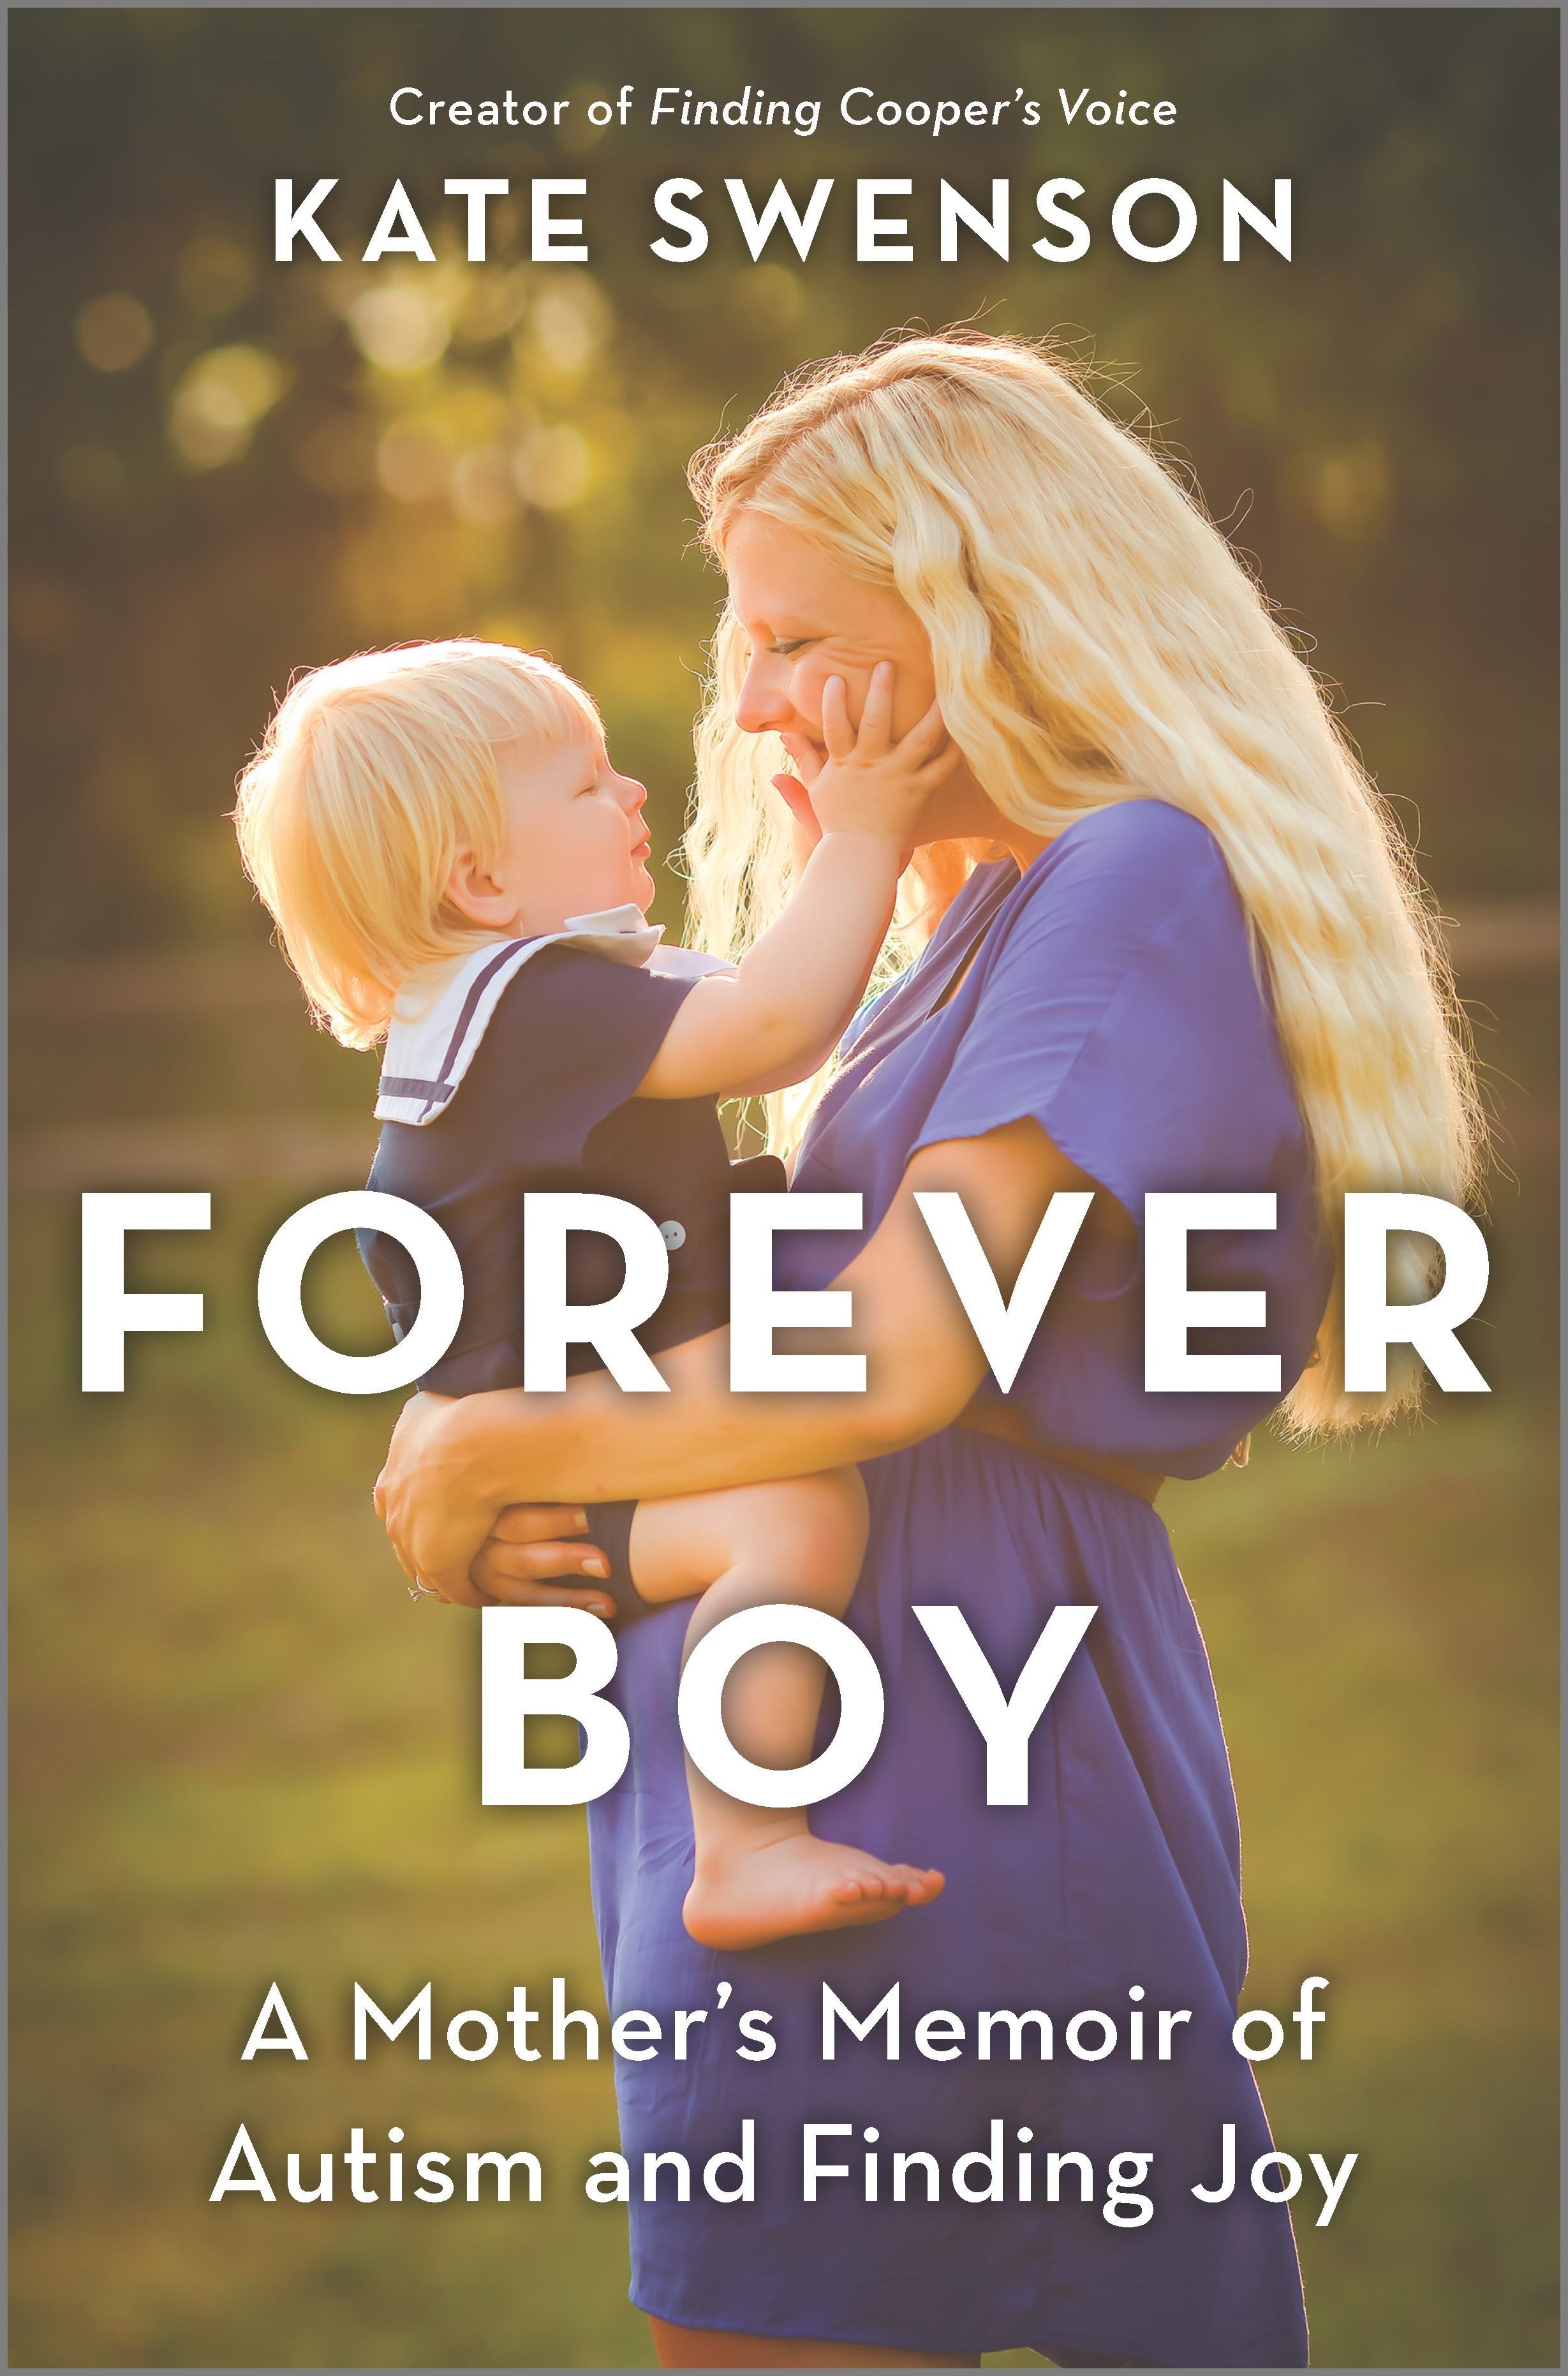 Forever Boy by Kate Swenson